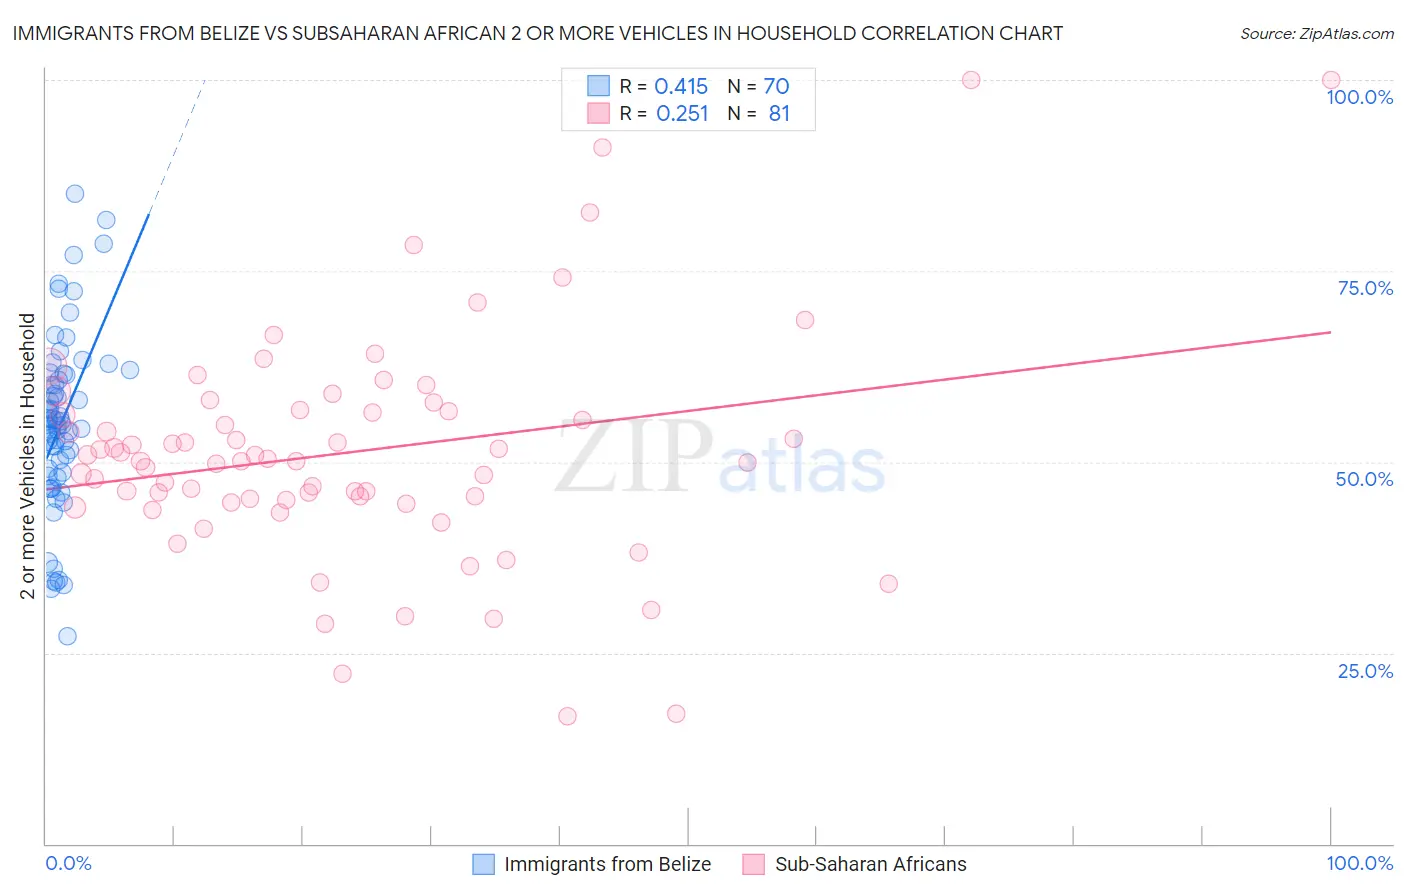 Immigrants from Belize vs Subsaharan African 2 or more Vehicles in Household